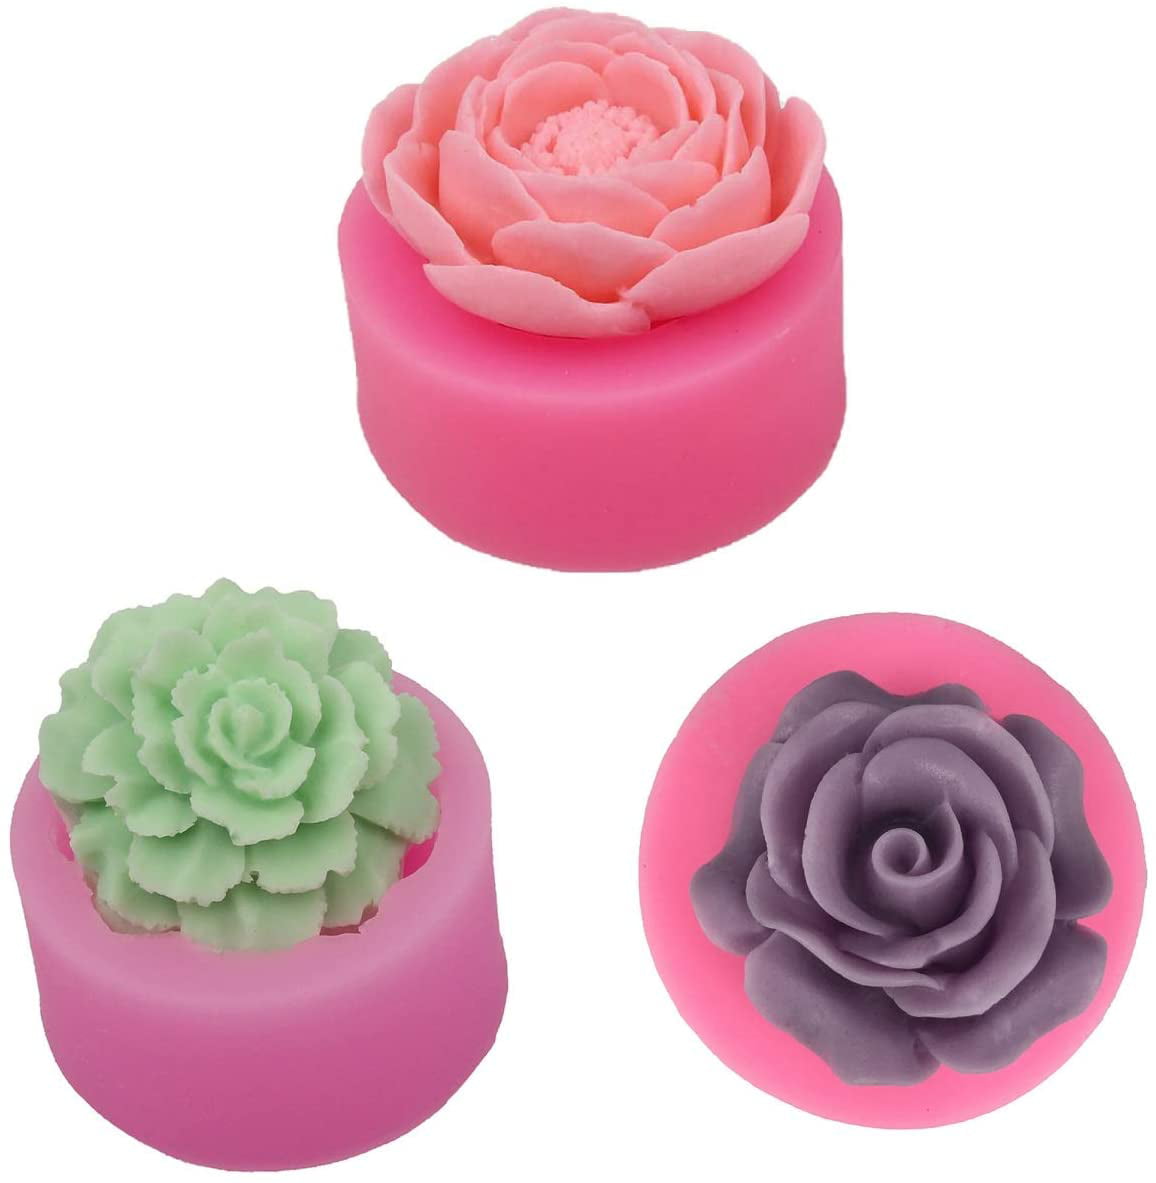 3 Metallic moulds flower shaped for sugar paste cake design and fimo 